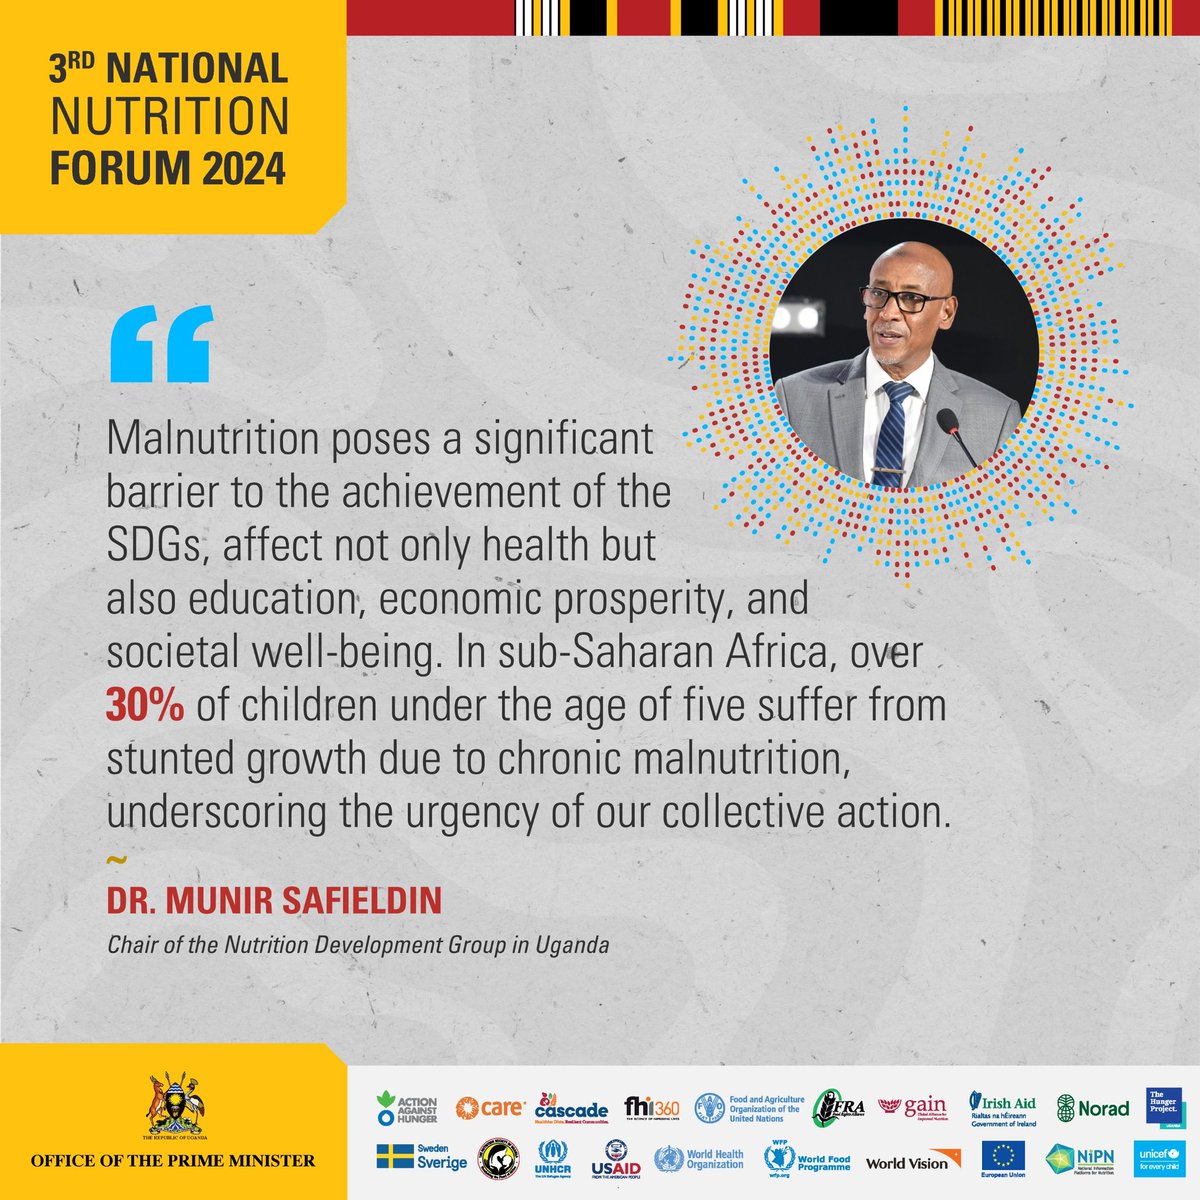 Messages from speakers and panels from Day 1, Day 2, and Day 3 at #NationalNutritionForum2024 @Munir_Safieldin #InvestInUGchildren